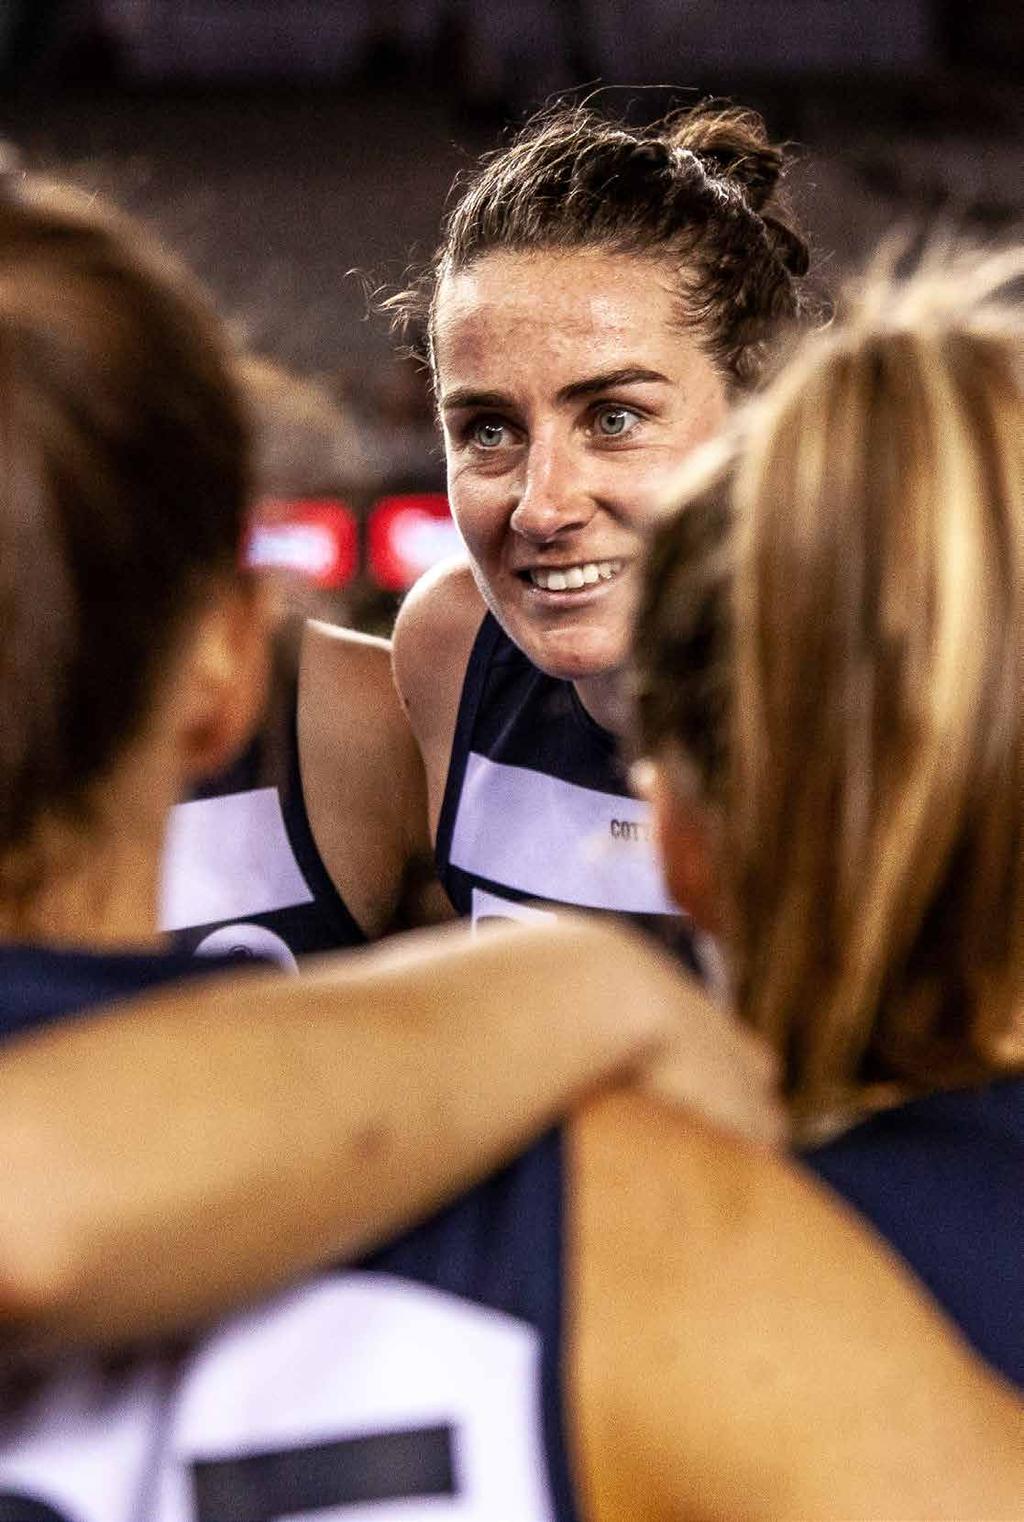 AFLW PLAYER SPONSORSHIP Make her story possible and help shape our future as we launch into this new and exciting season. Align yourself or your business with our inaugural AFLW team.